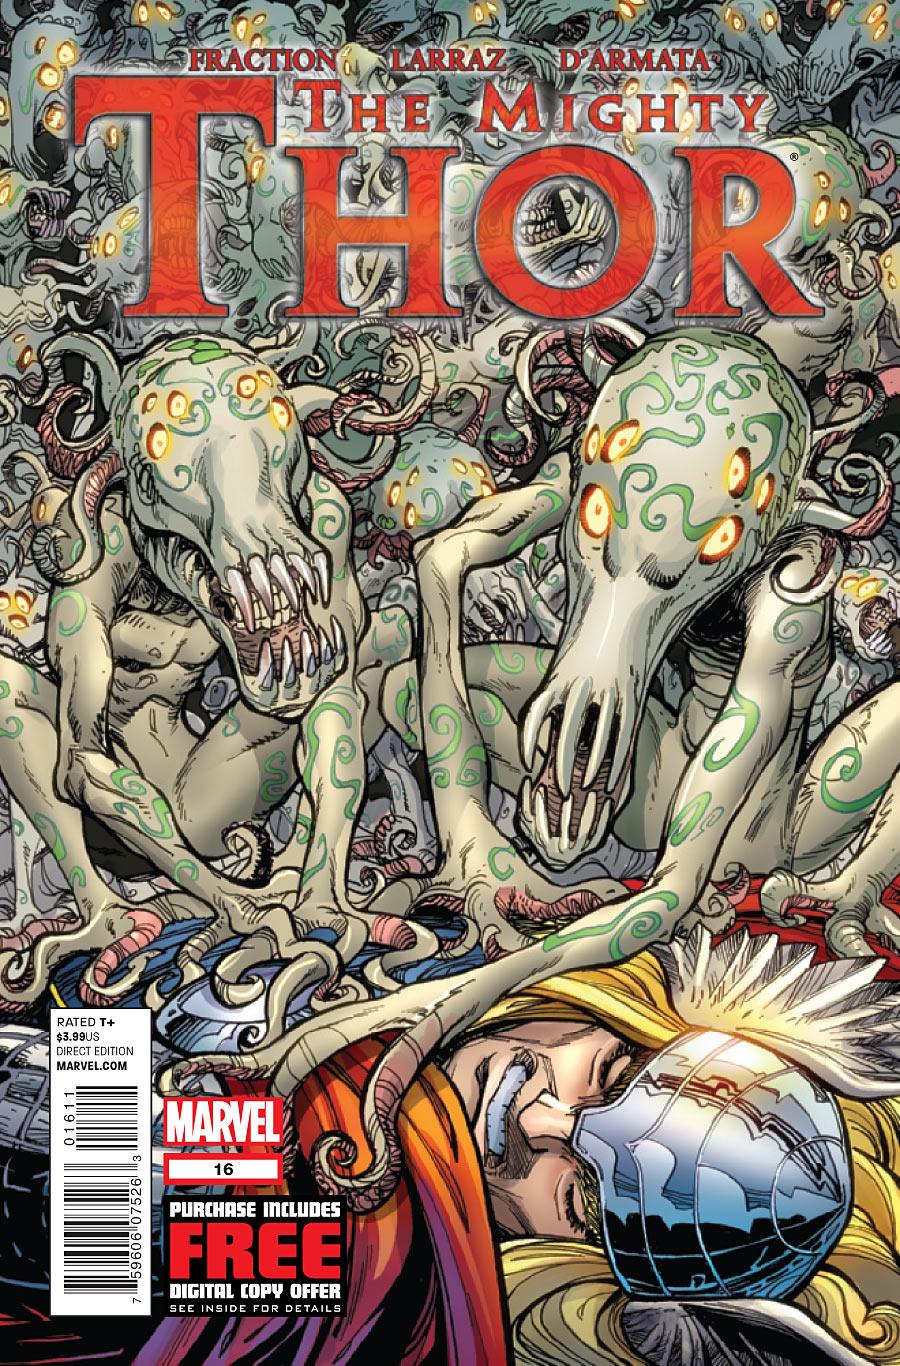 The Mighty Thor Vol. 1 #16